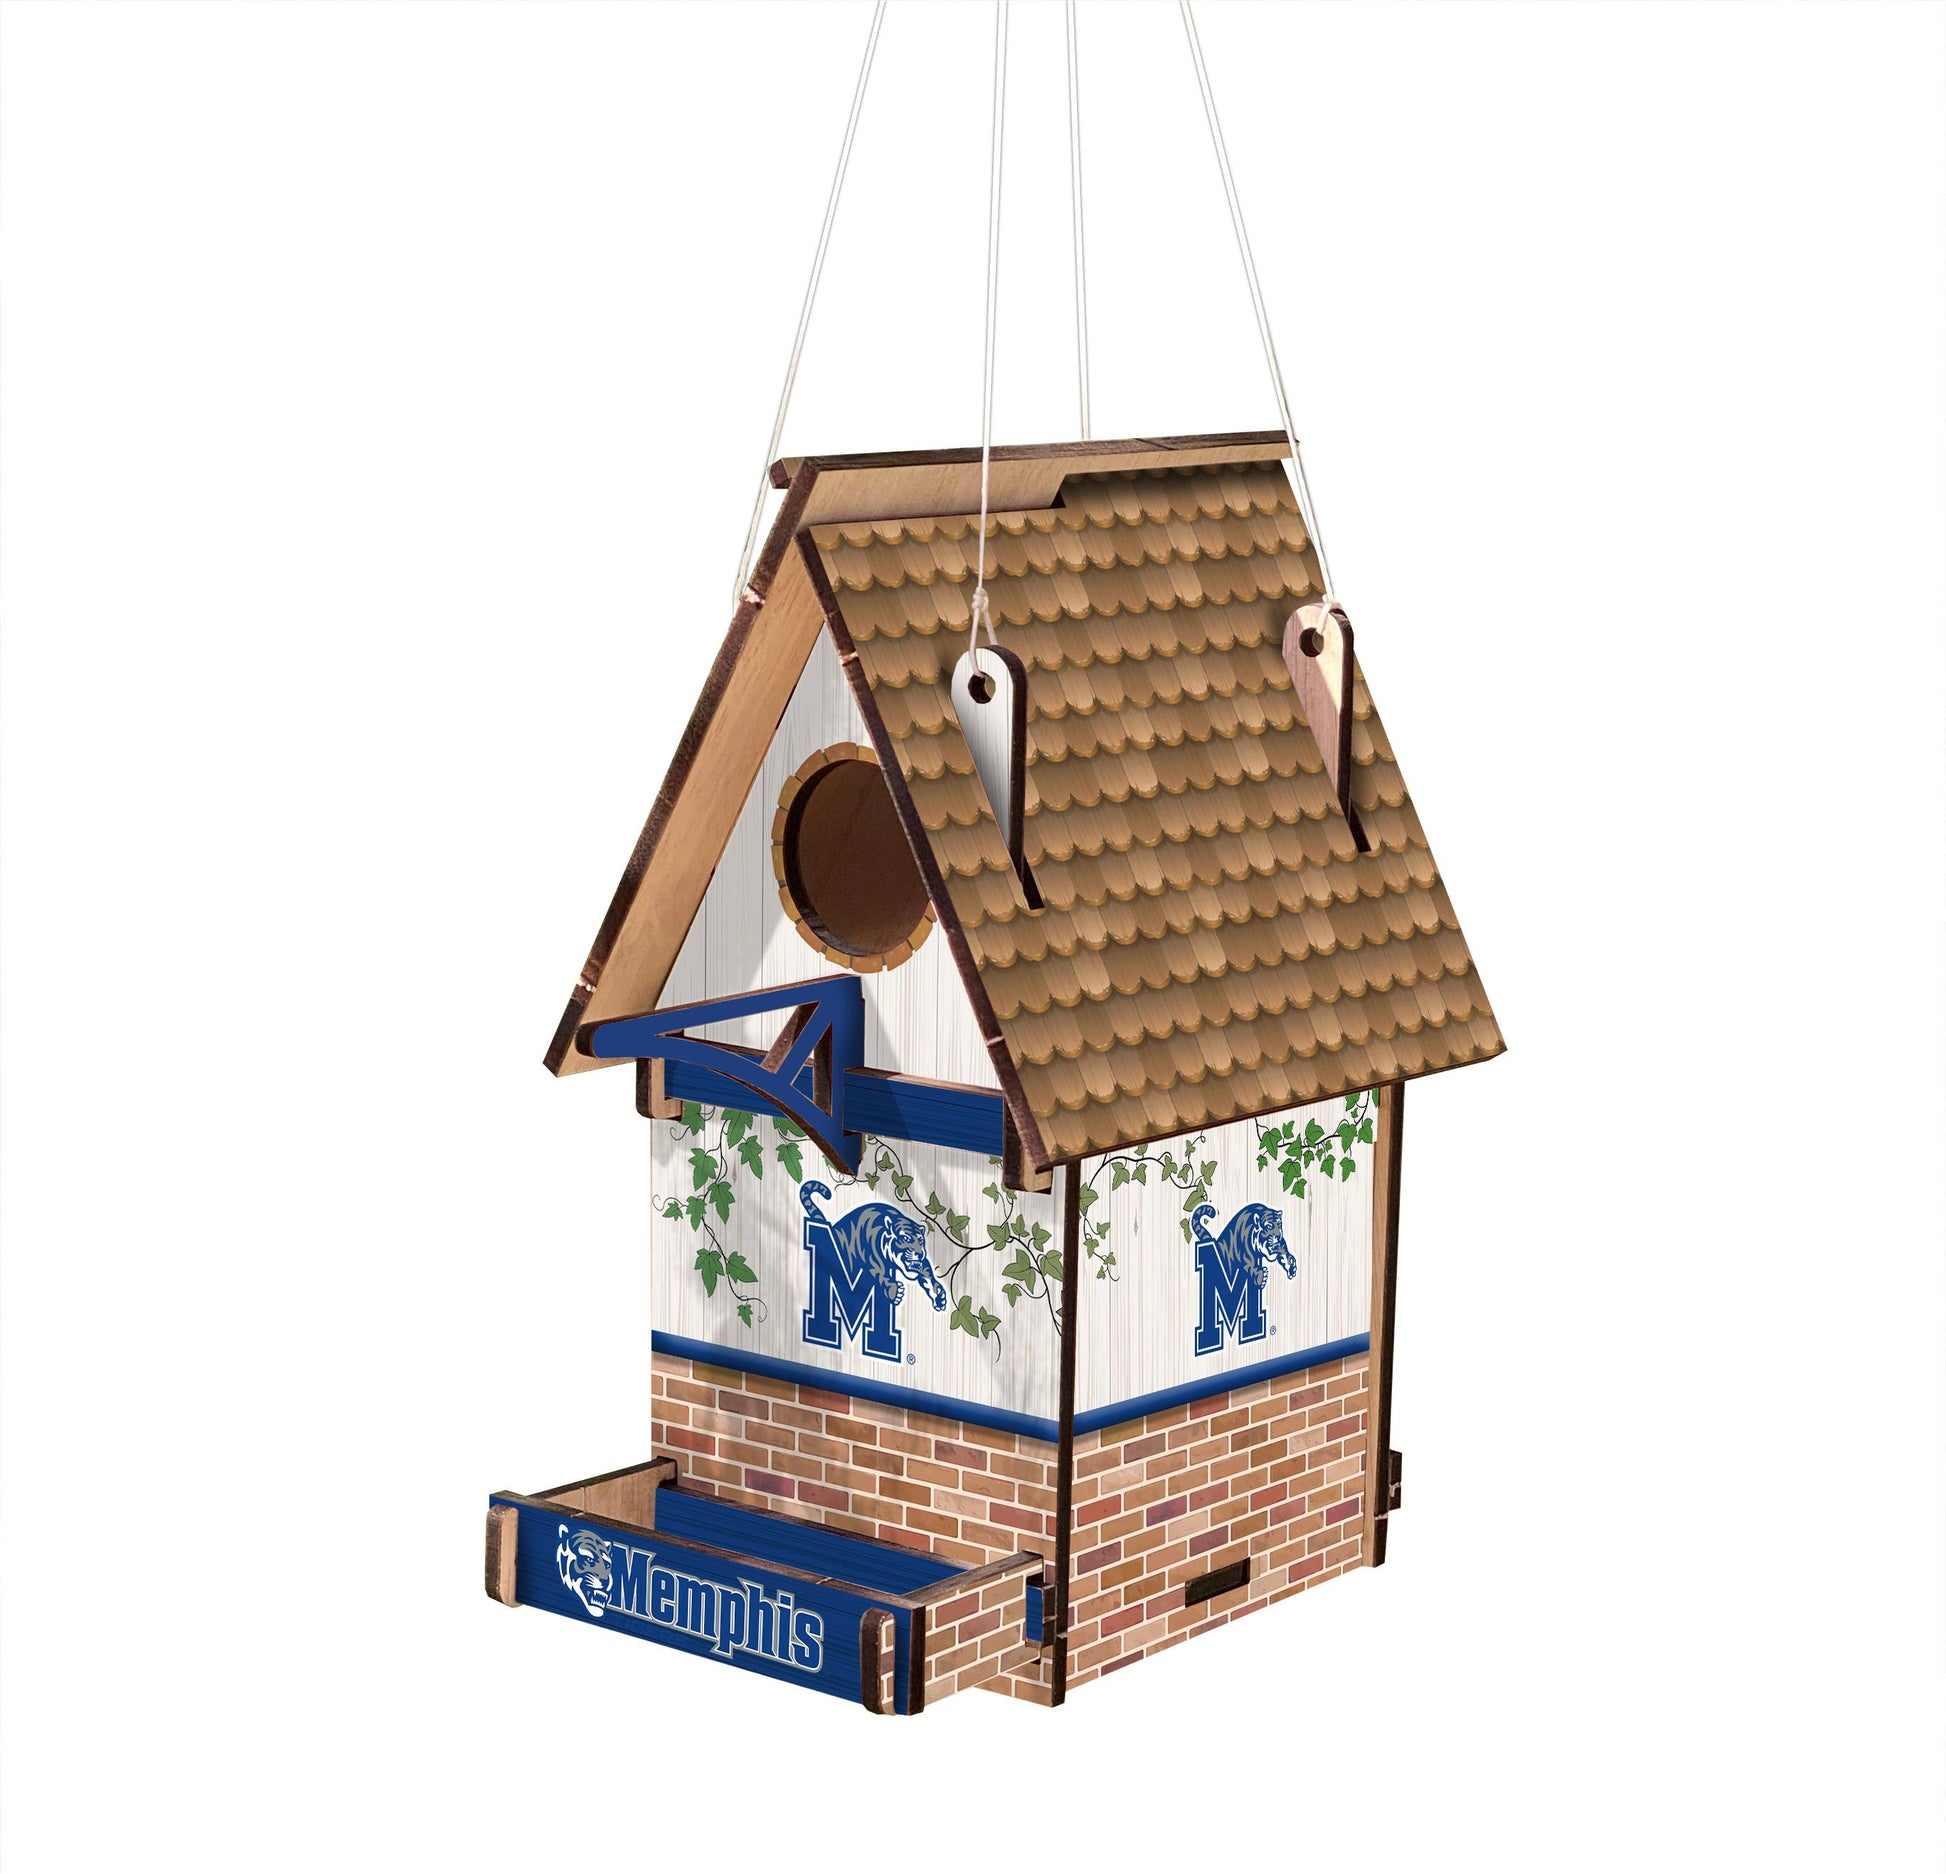 Show your team spirit and love for birds with the Memphis Tigers Wood Birdhouse by Fan Creations. Made in the USA with MDF, it features the team's colors and graphics and measures 15"x15".